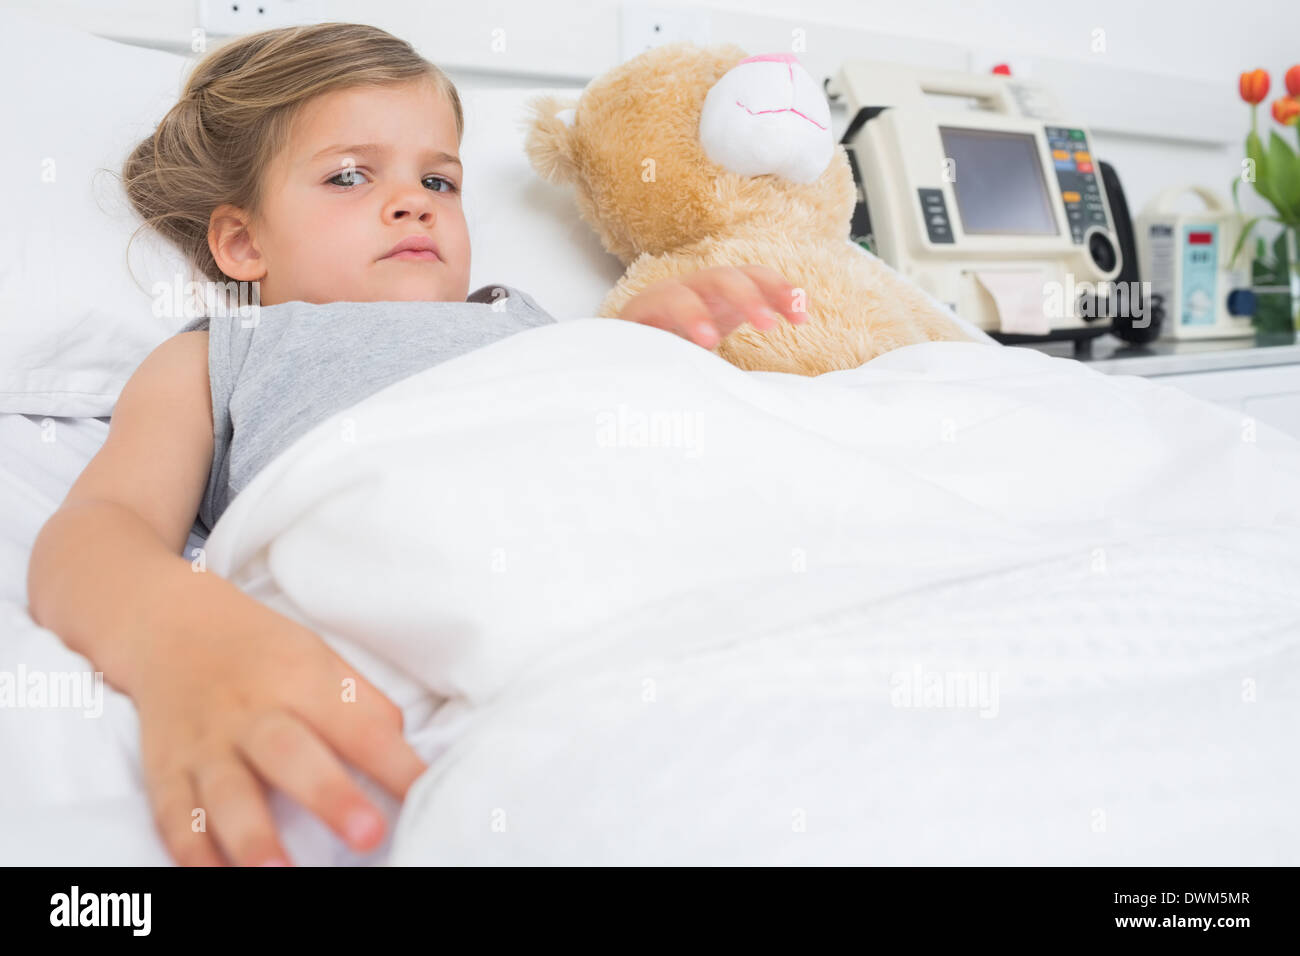 Cute girl lying in hospital bed Stock Photo